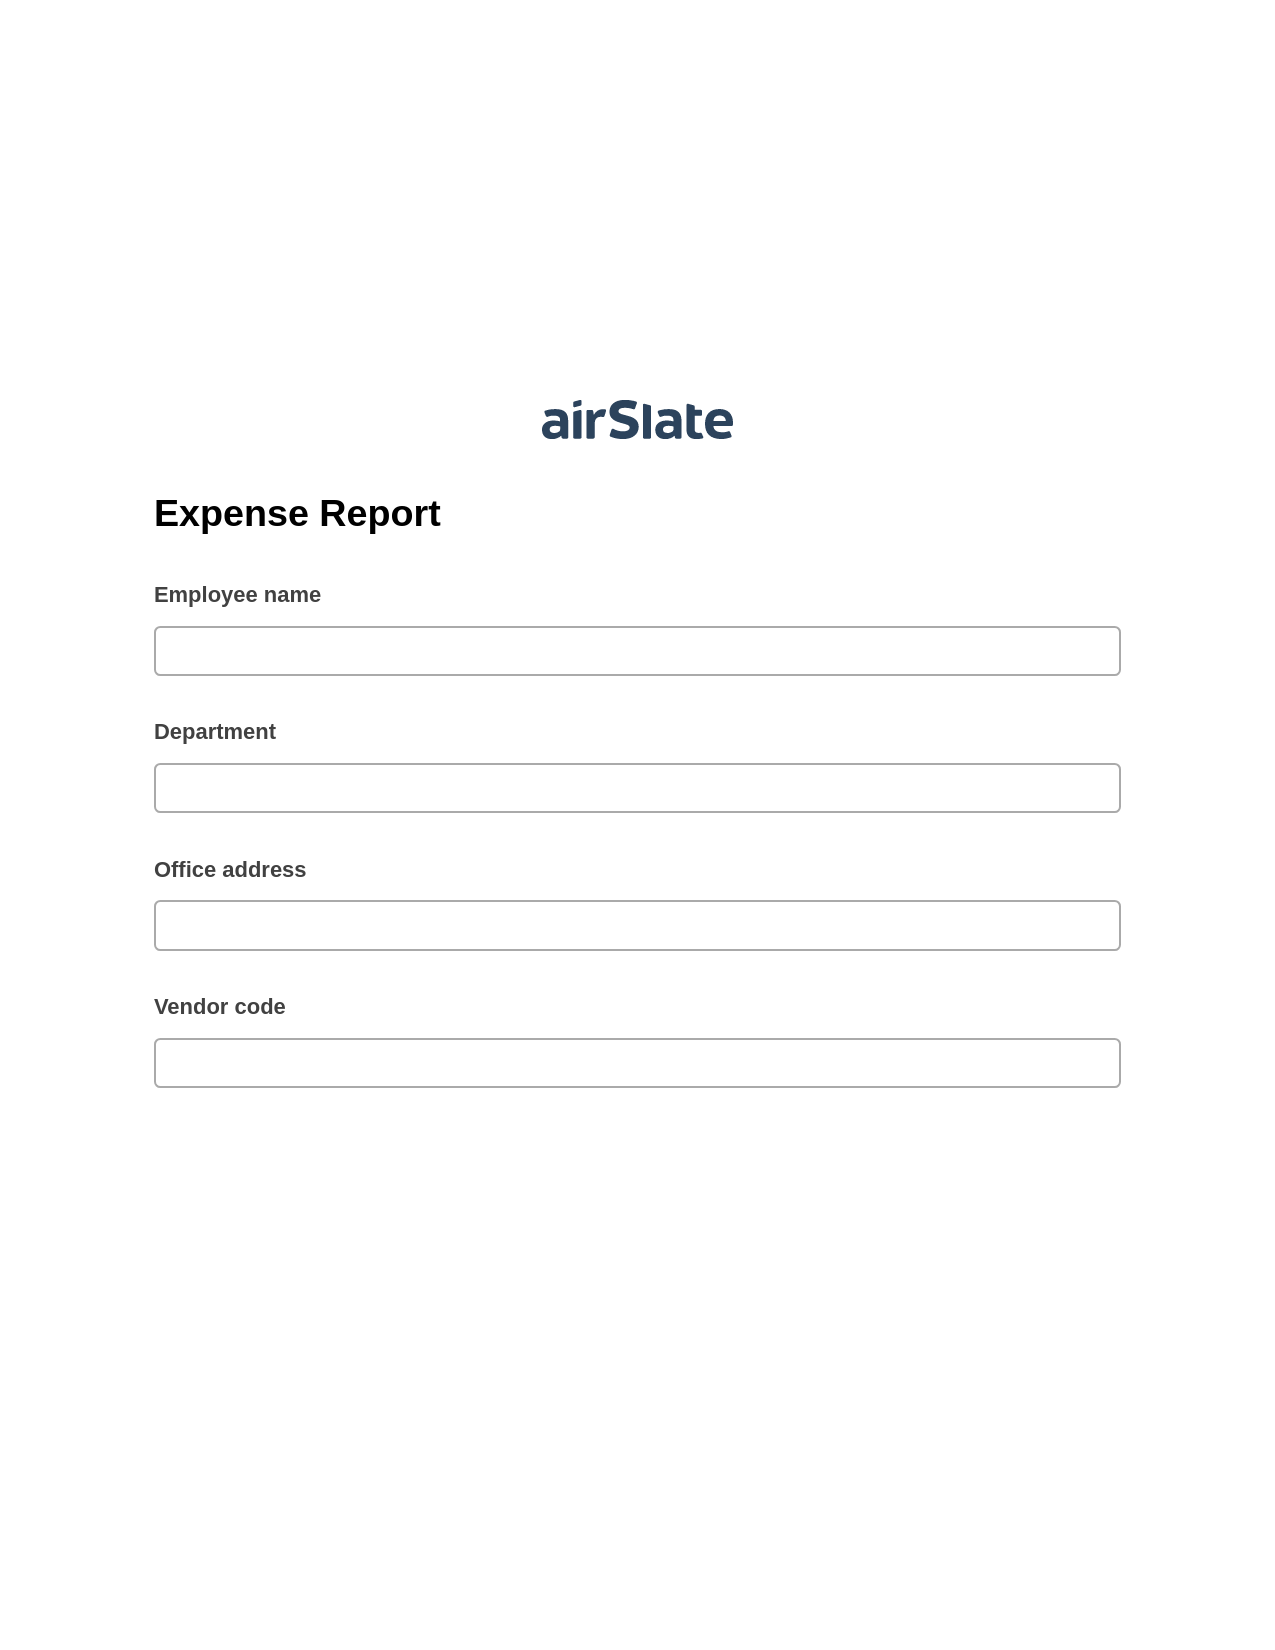 Expense Report Pre-fill Document Bot, Assign Roles to Recipients Bot, Export to Smartsheet